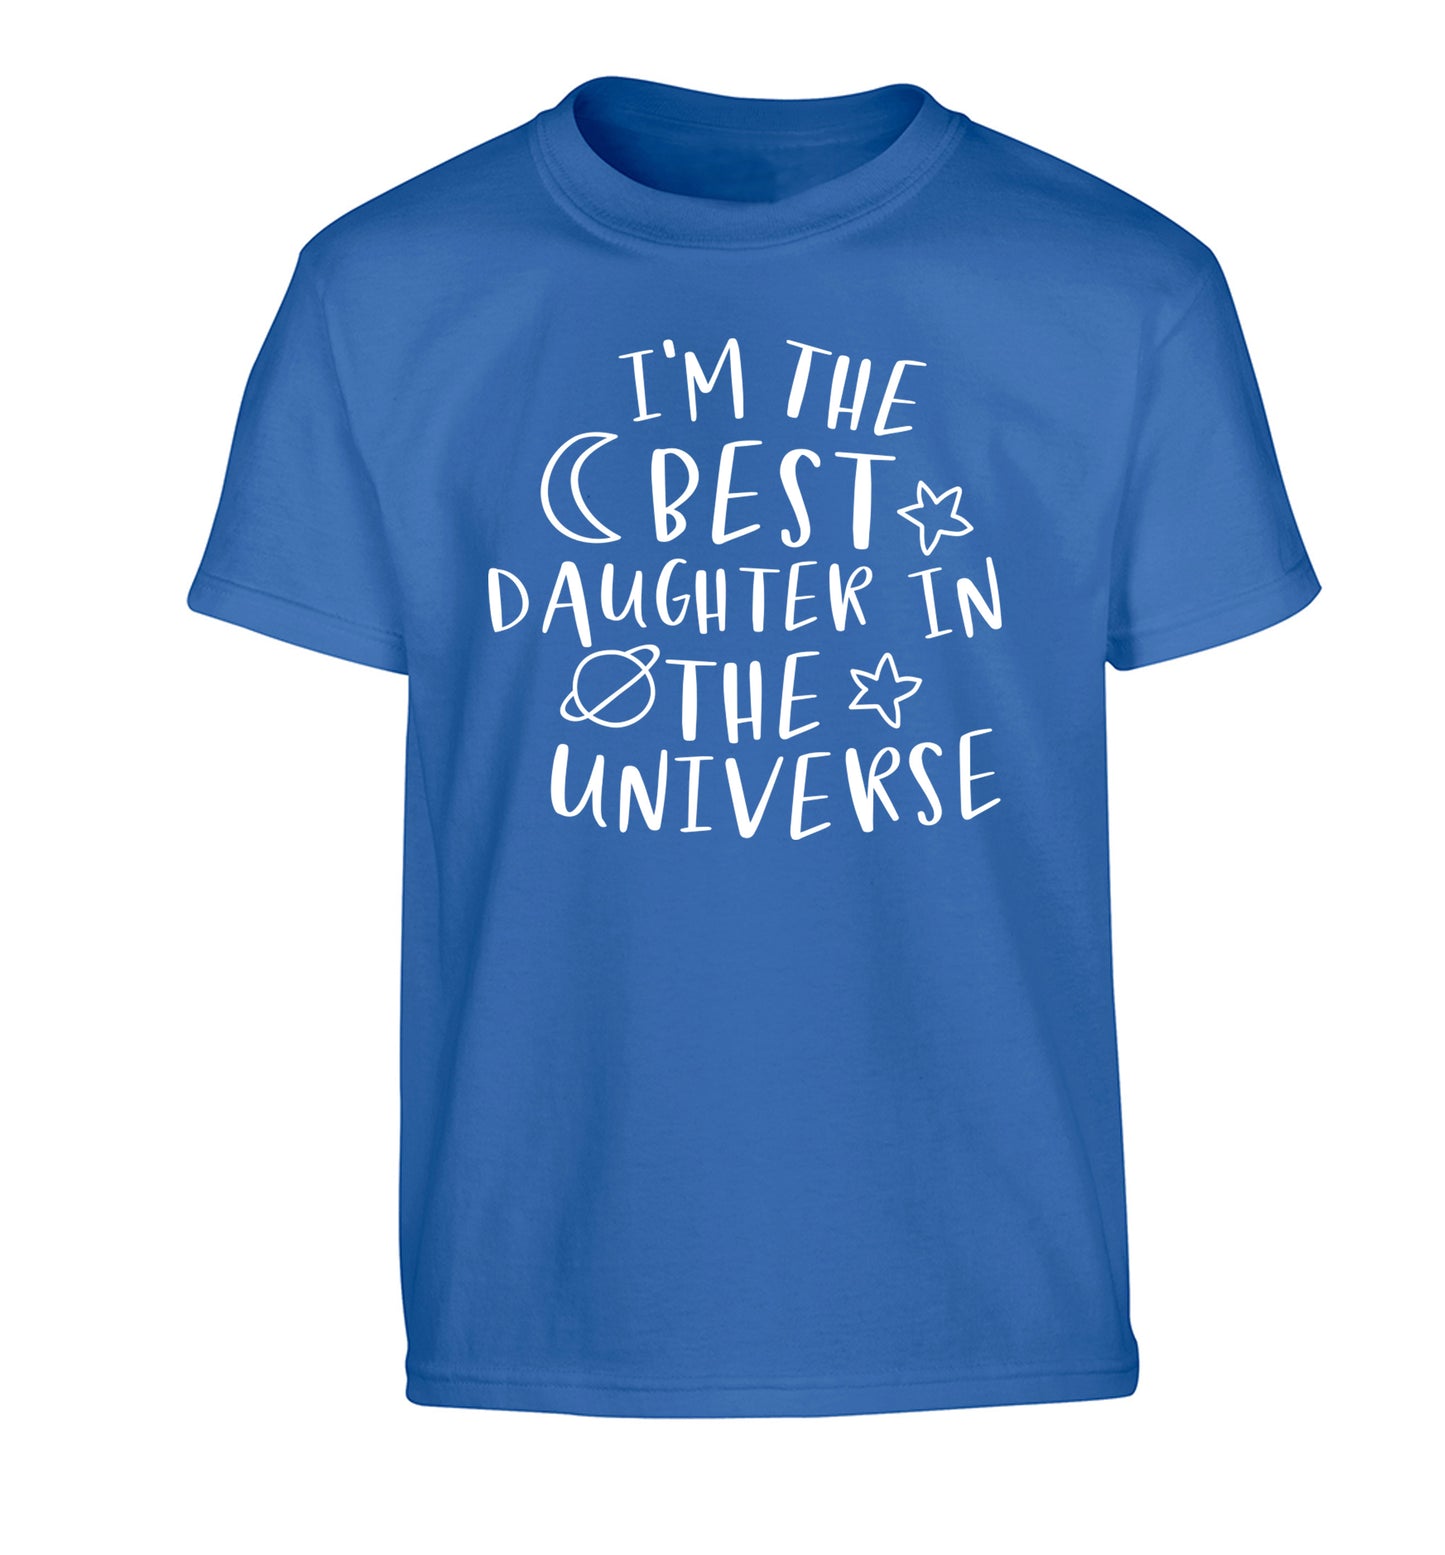 I'm the best daughter in the universe Children's blue Tshirt 12-13 Years